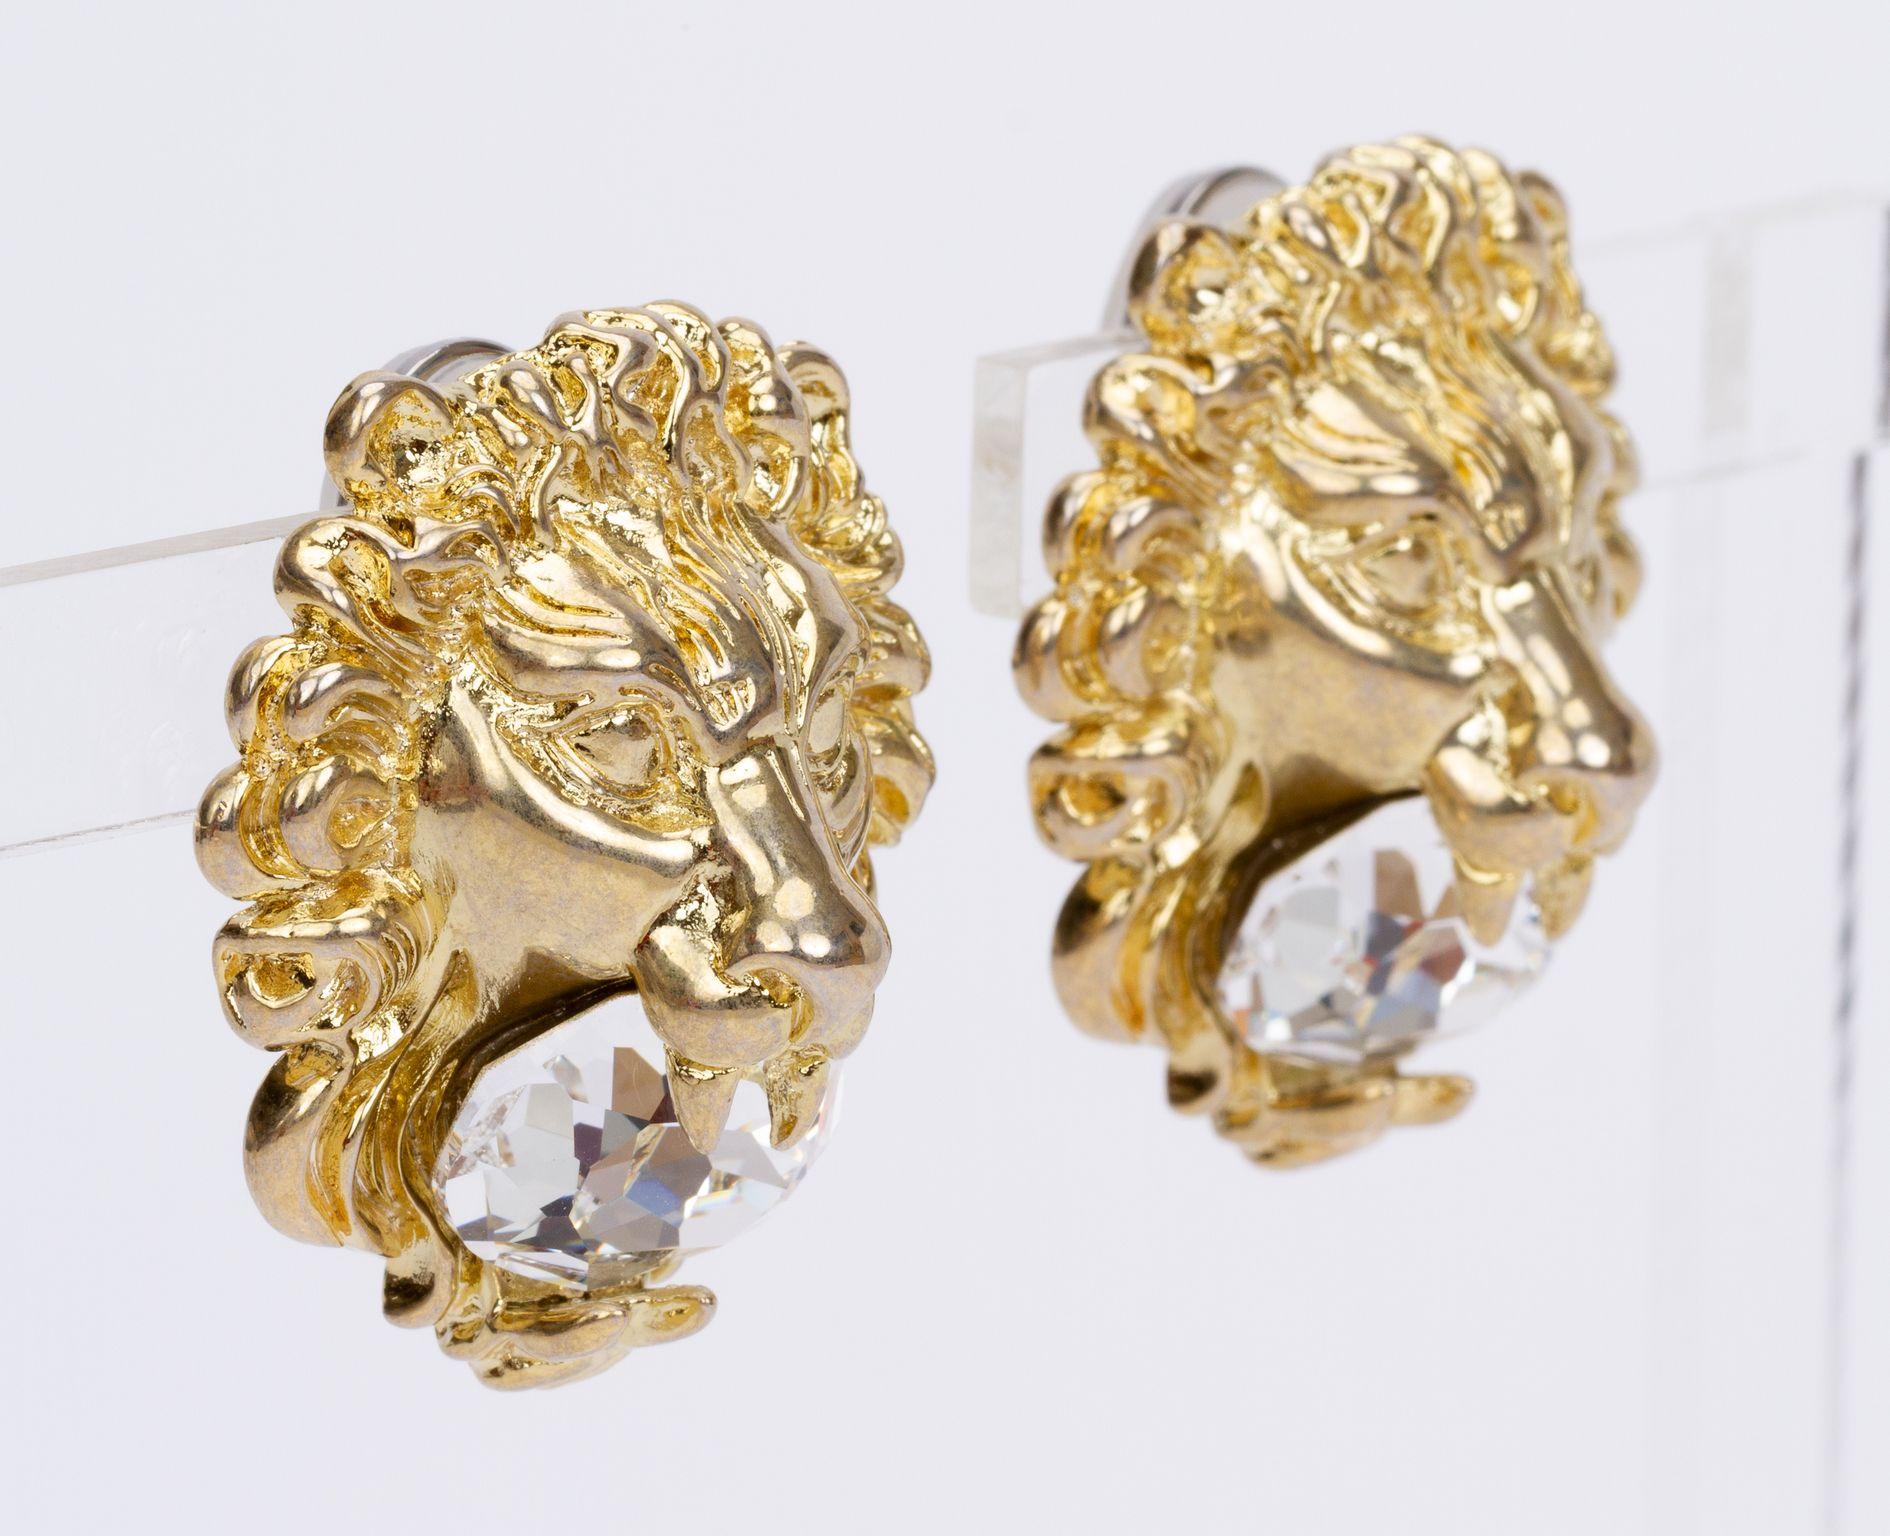 Gucci earrings in form of a lion who holds a crystal in it's mouth. They're clip on and brand new. They come with the original box and dust cover.
